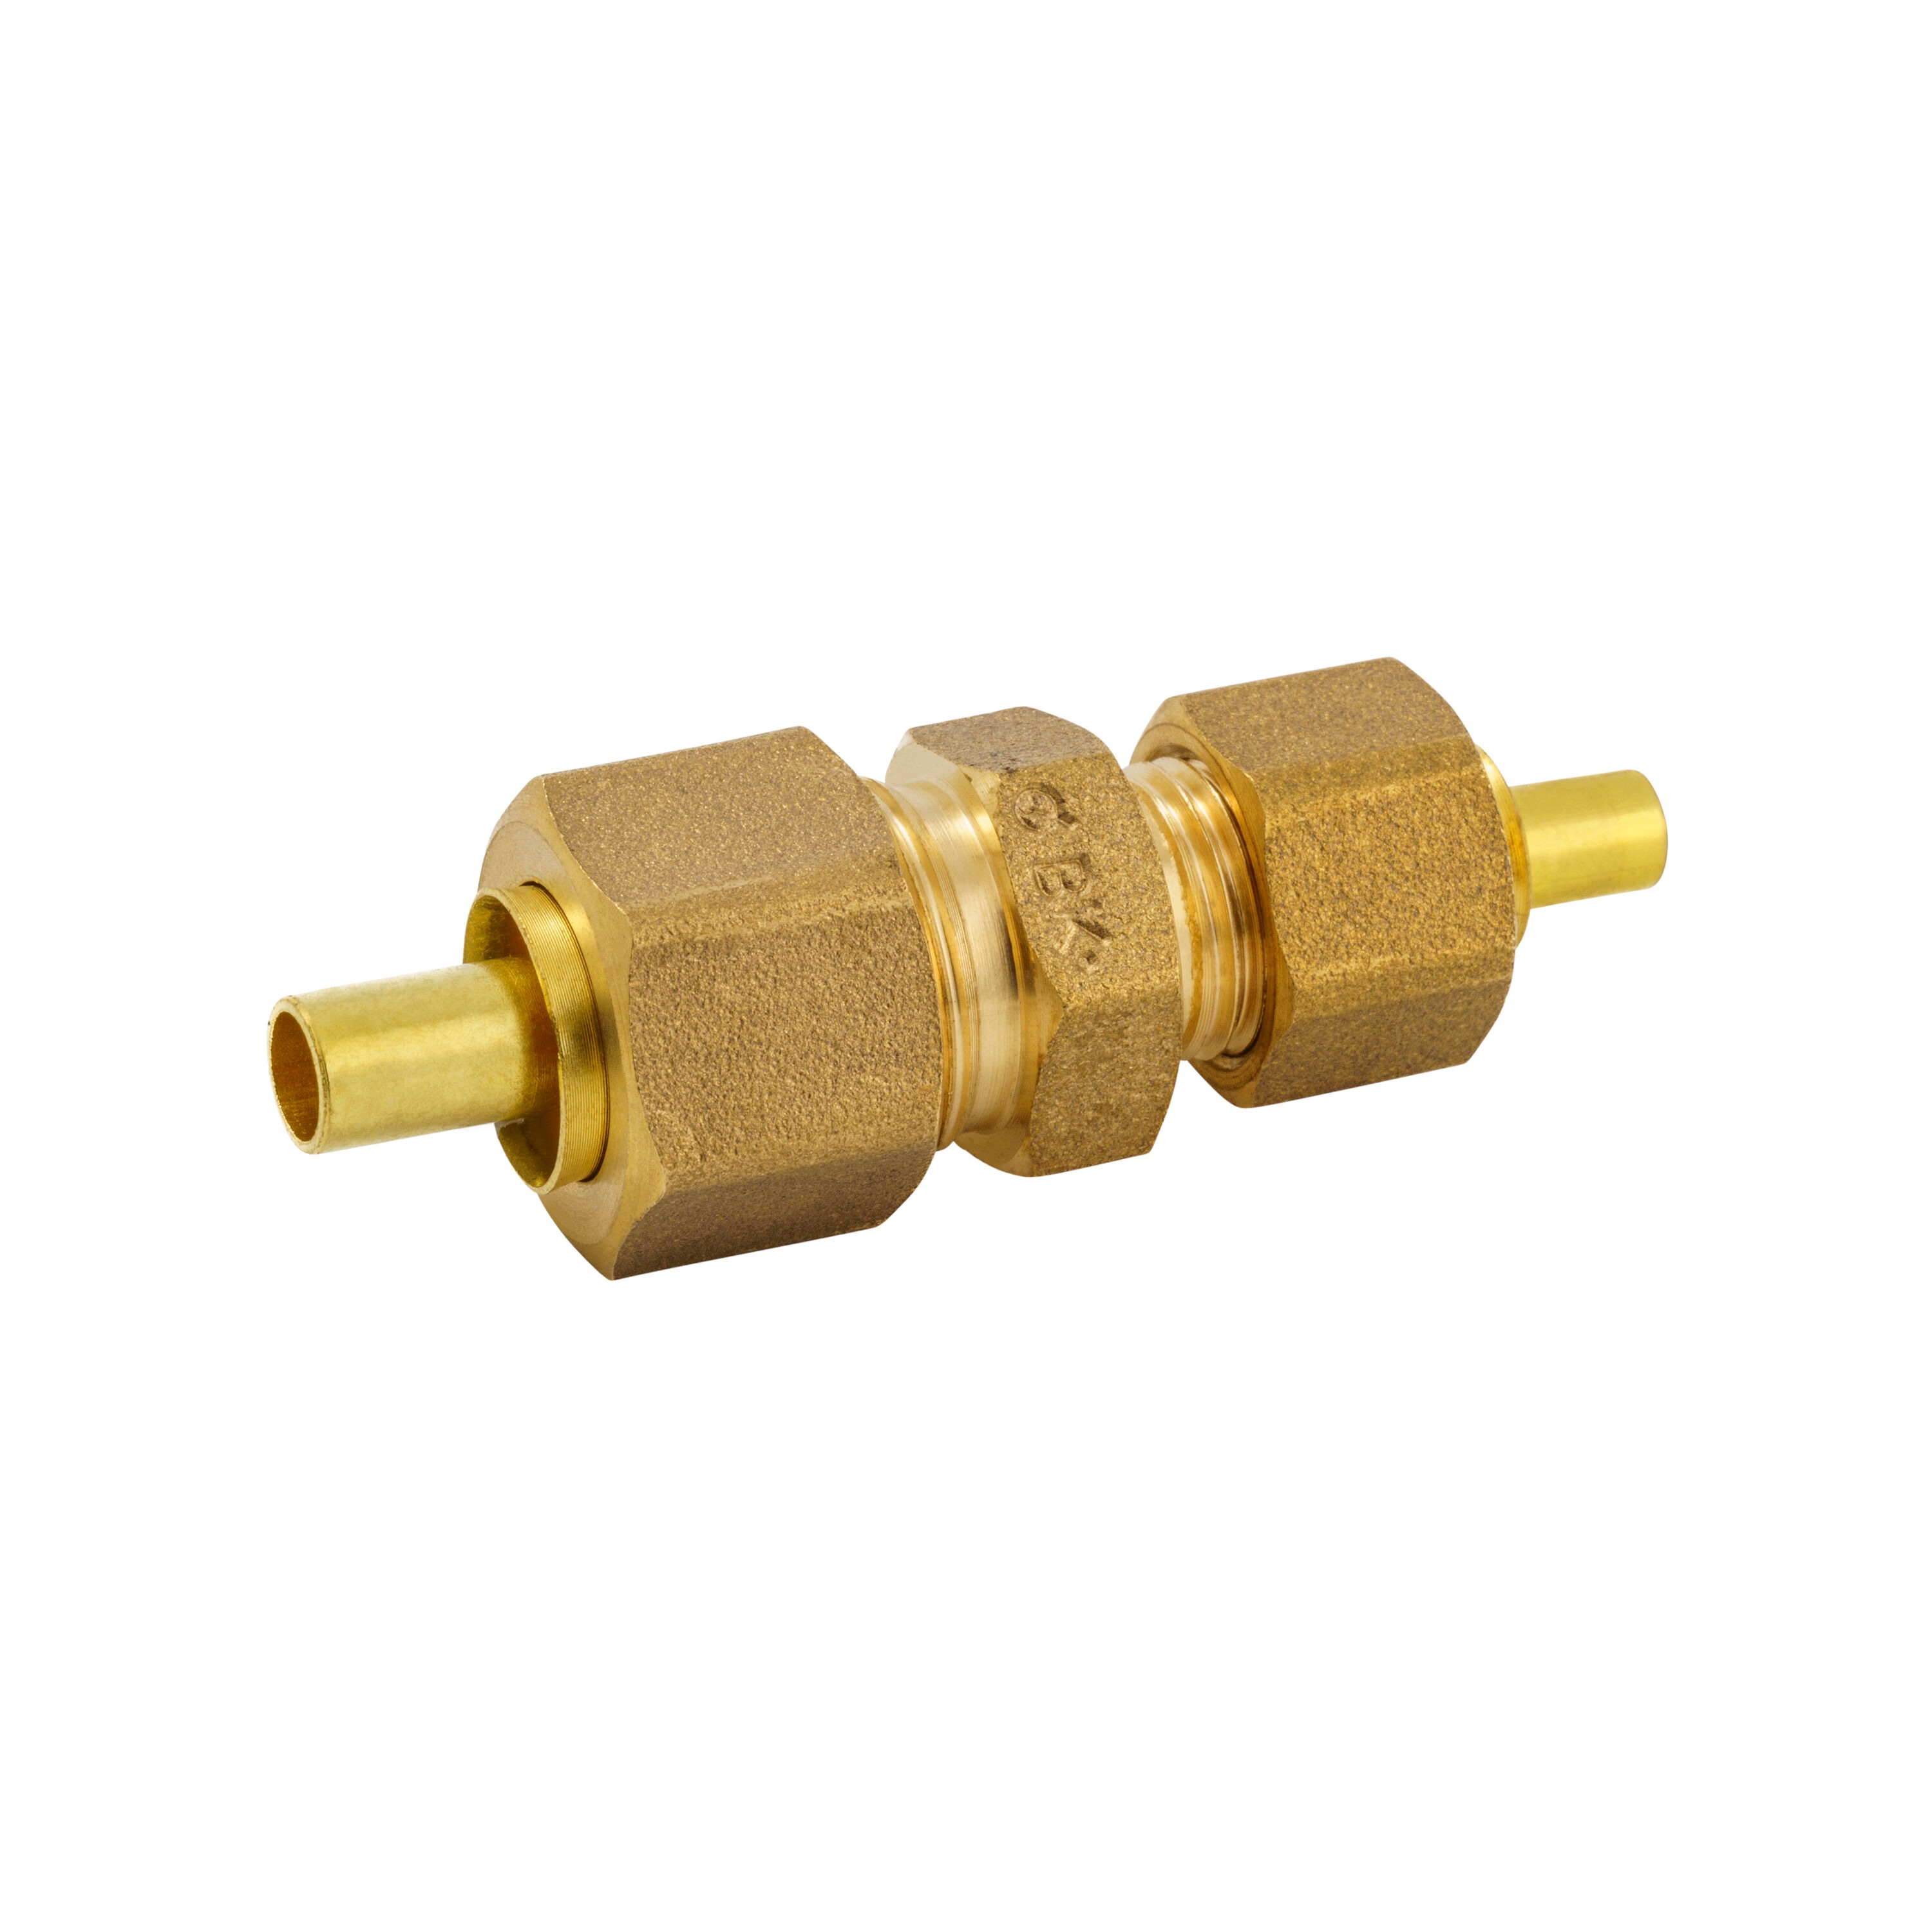 0104 04 00 - Brass Compression Fittings